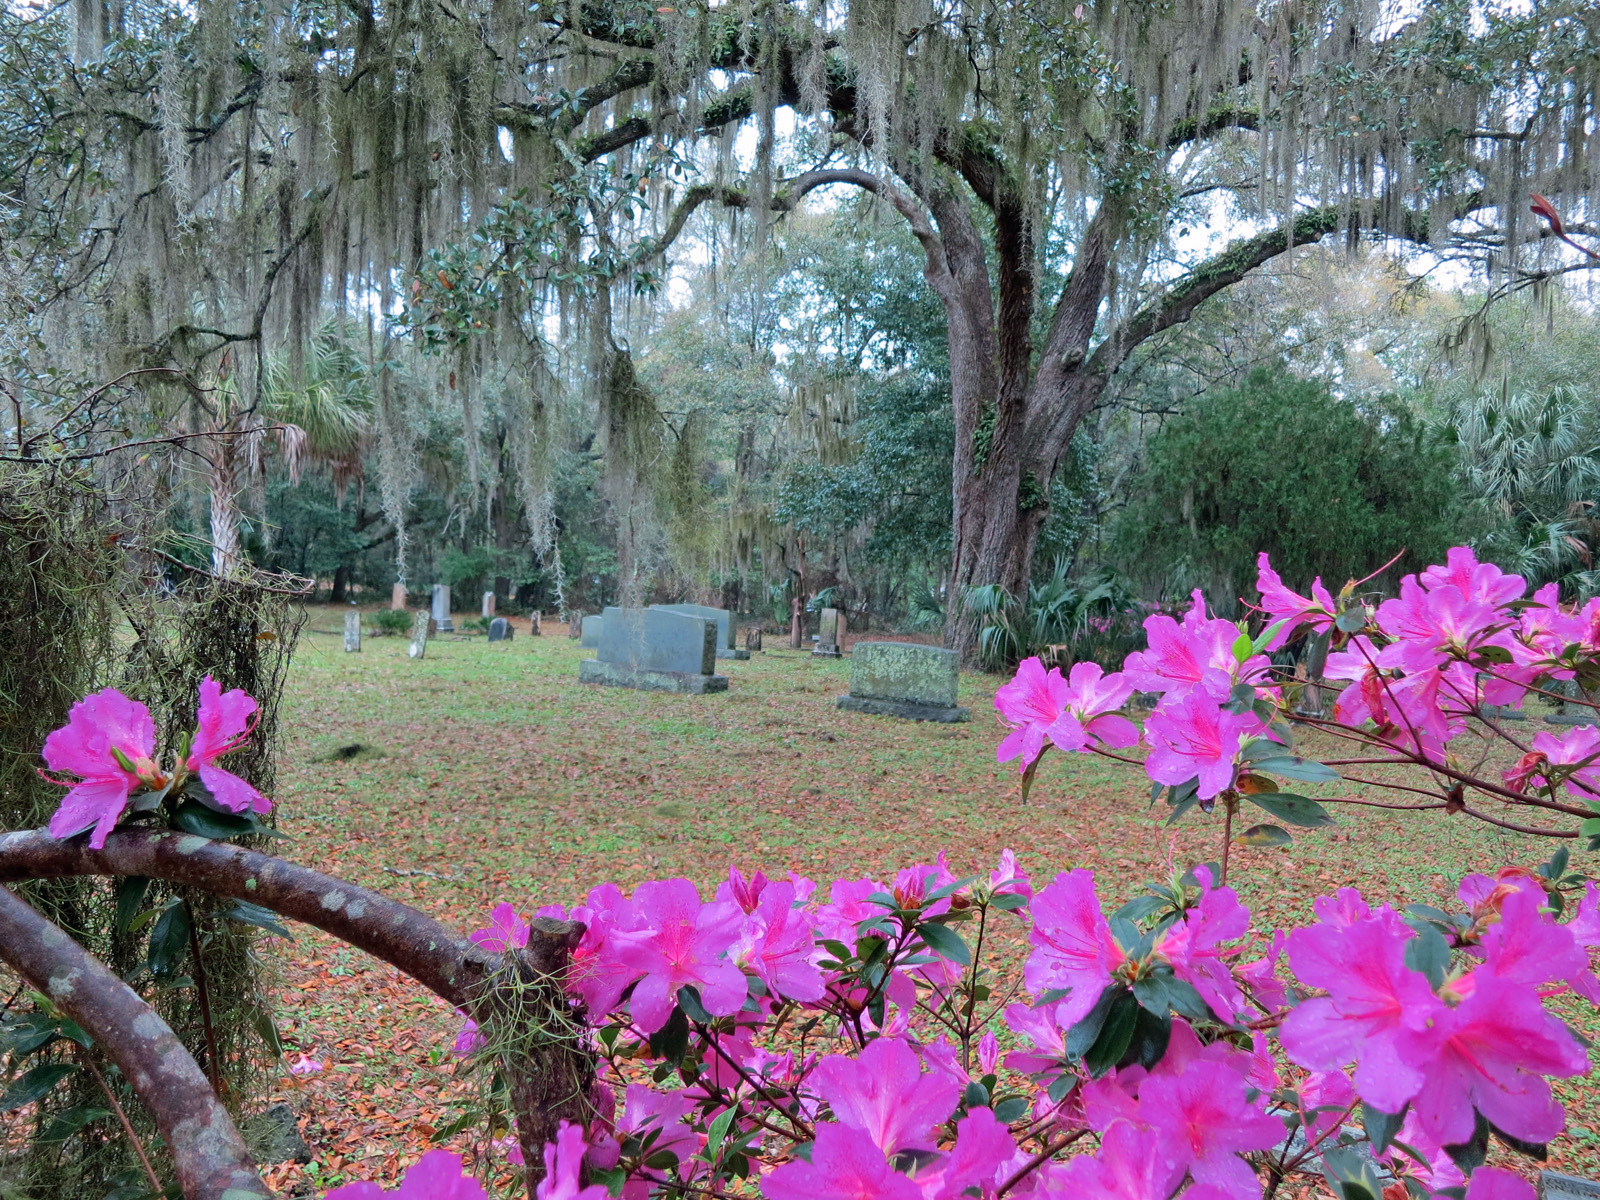 Old cemetery in spring along Withlacoochee State Trail in Inverness.(Photo: Bonnie Gross)